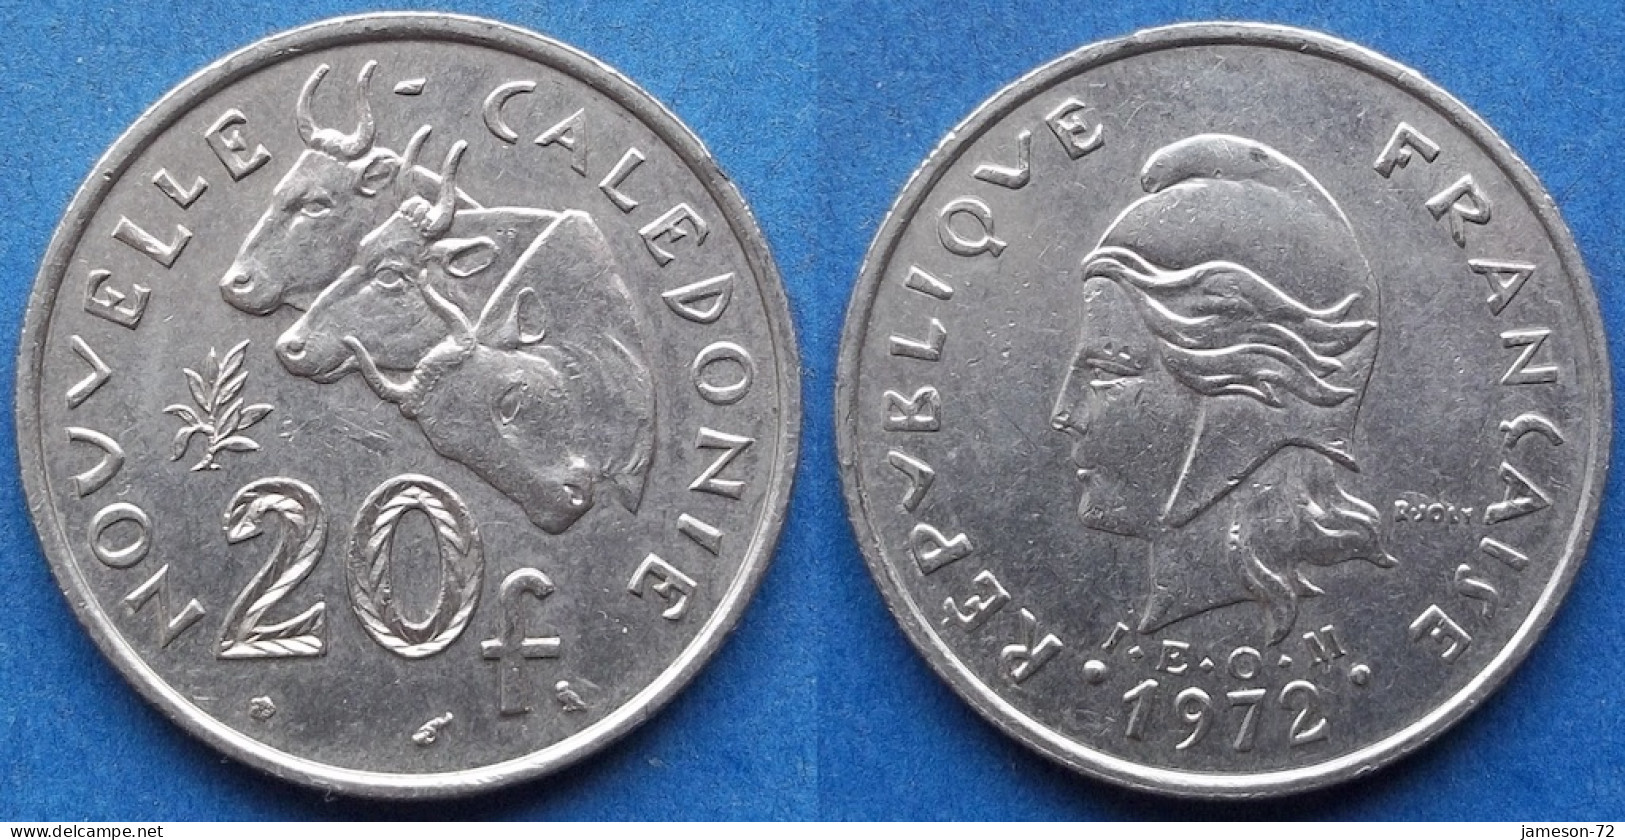 NEW CALEDONIA - 20 Francs 1972 "Three Ox" KM# 12 French Overseas Territory - Edelweiss Coins - New Caledonia